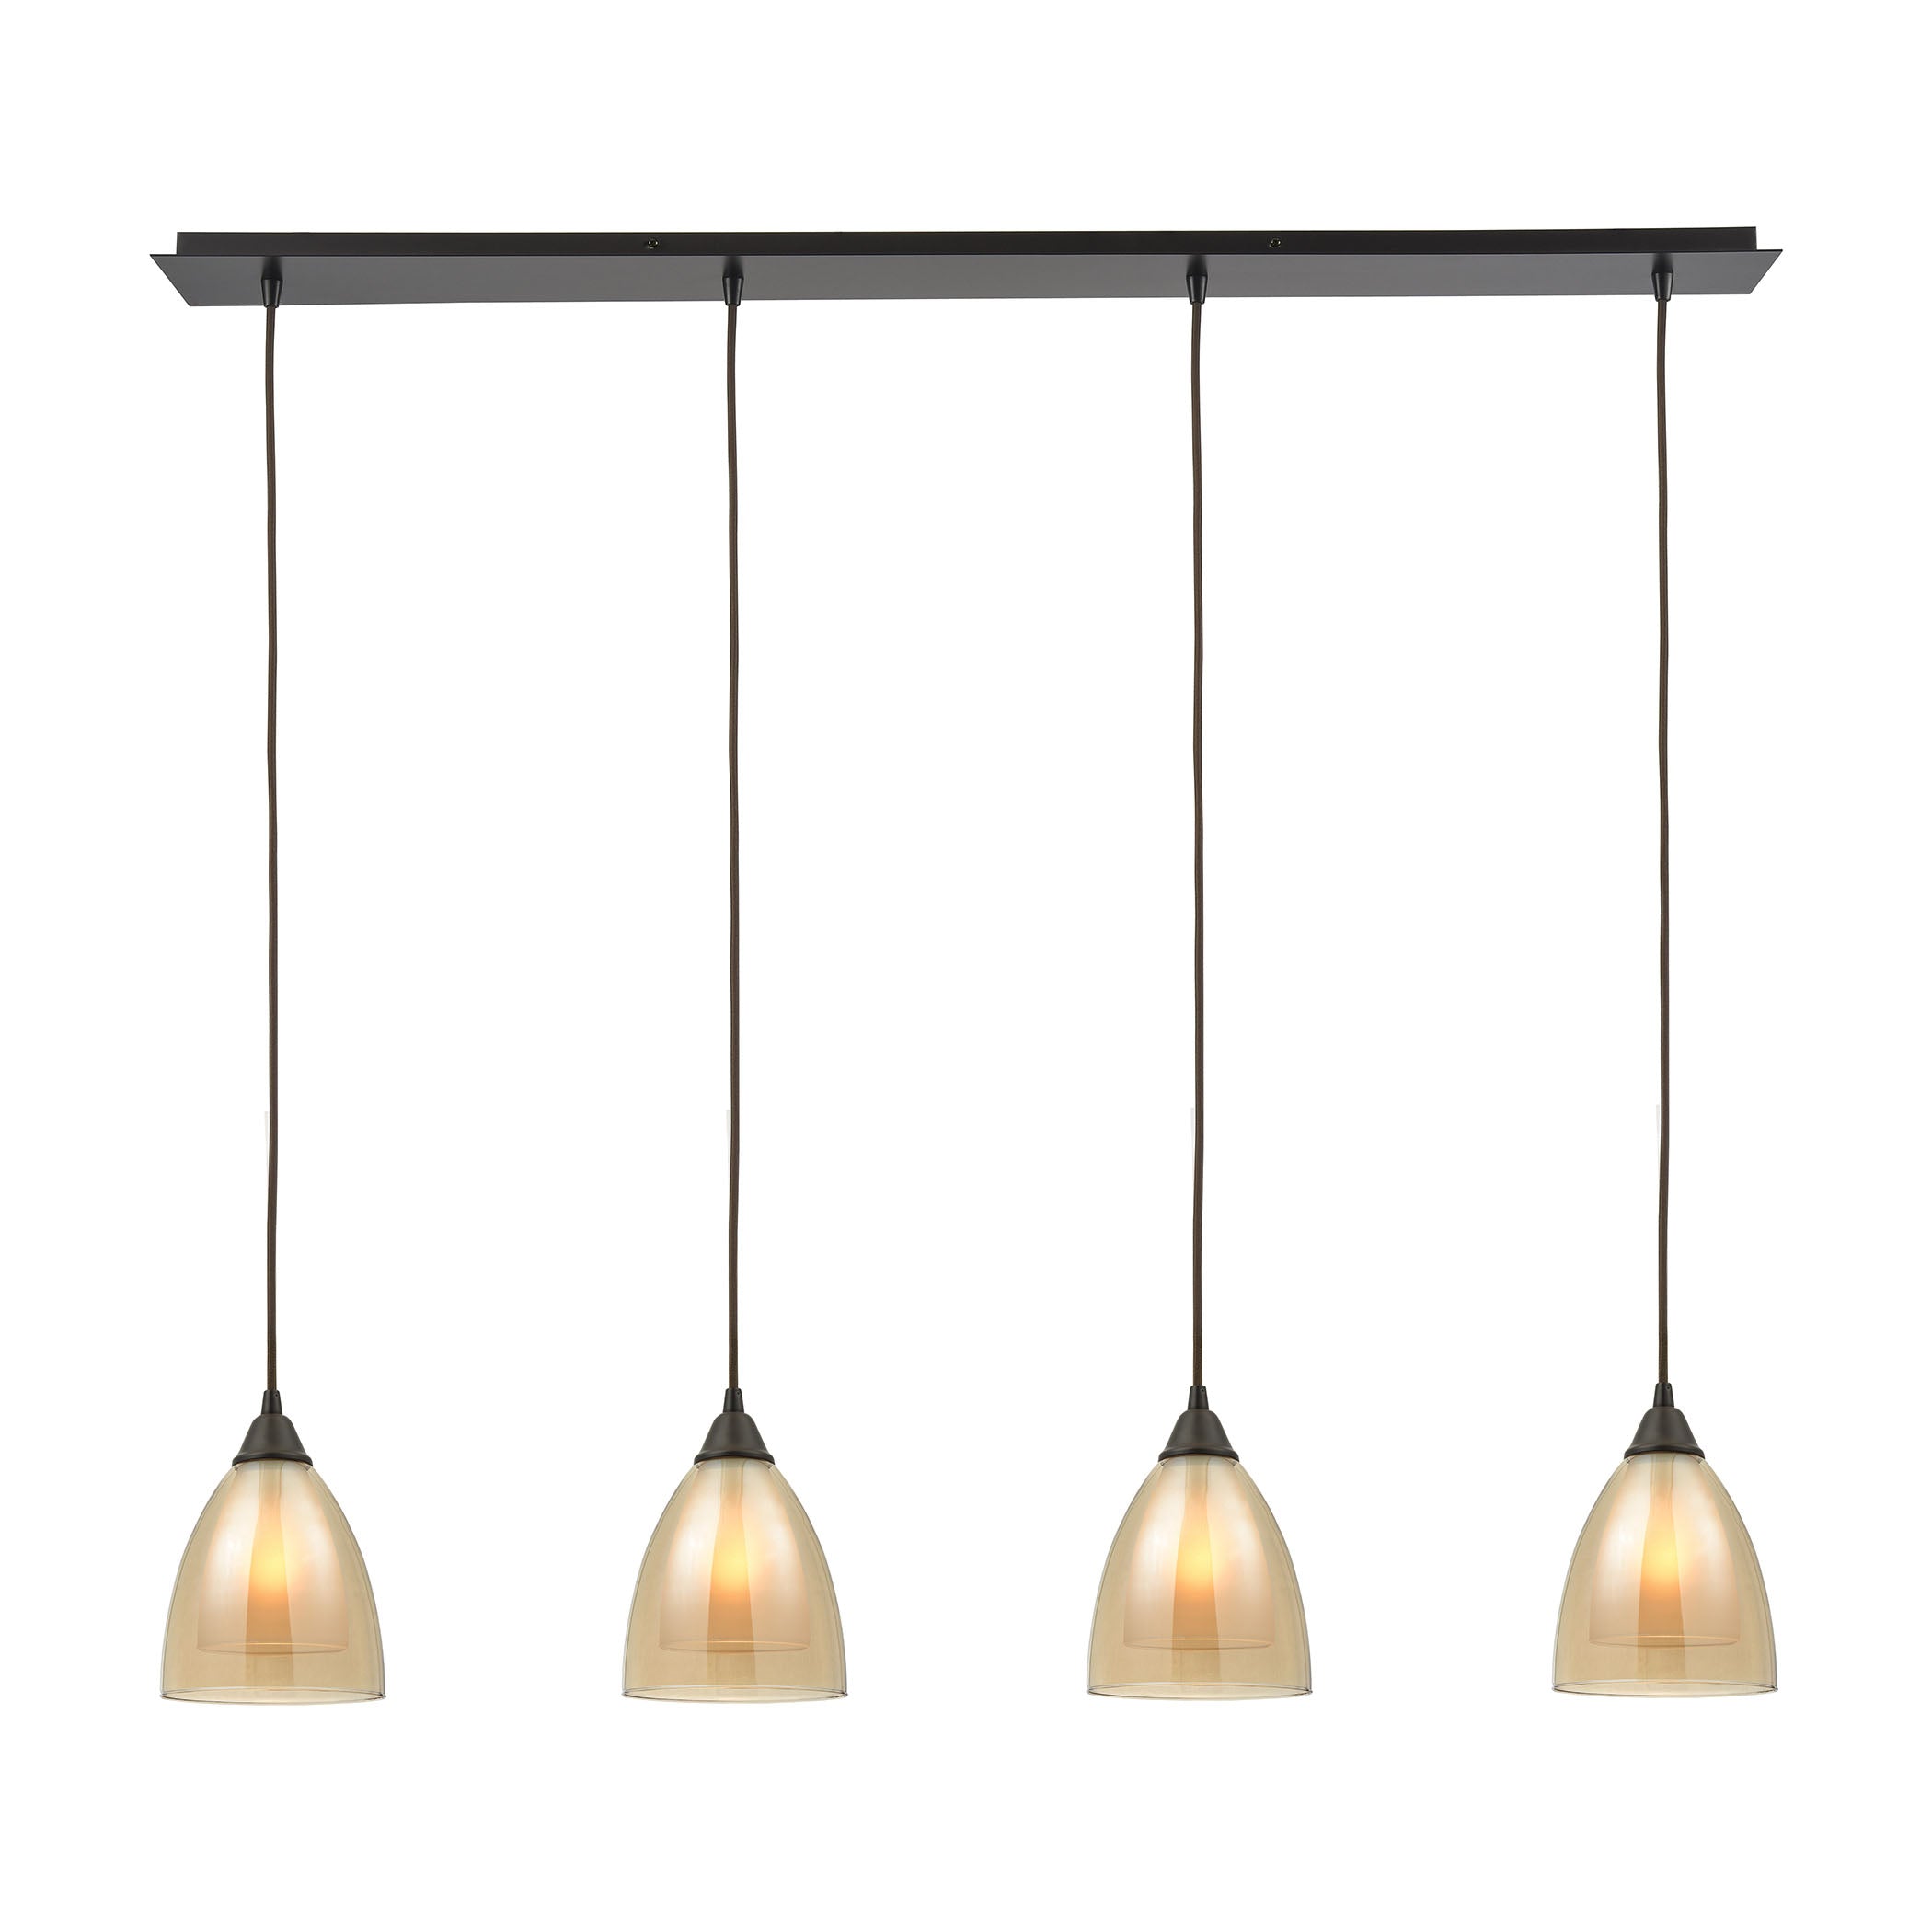 ELK Lighting 10474/4LP Layers 4-Light Linear Pendant Fixture in Oil Rubbed Bronze with Amber Teak Glass